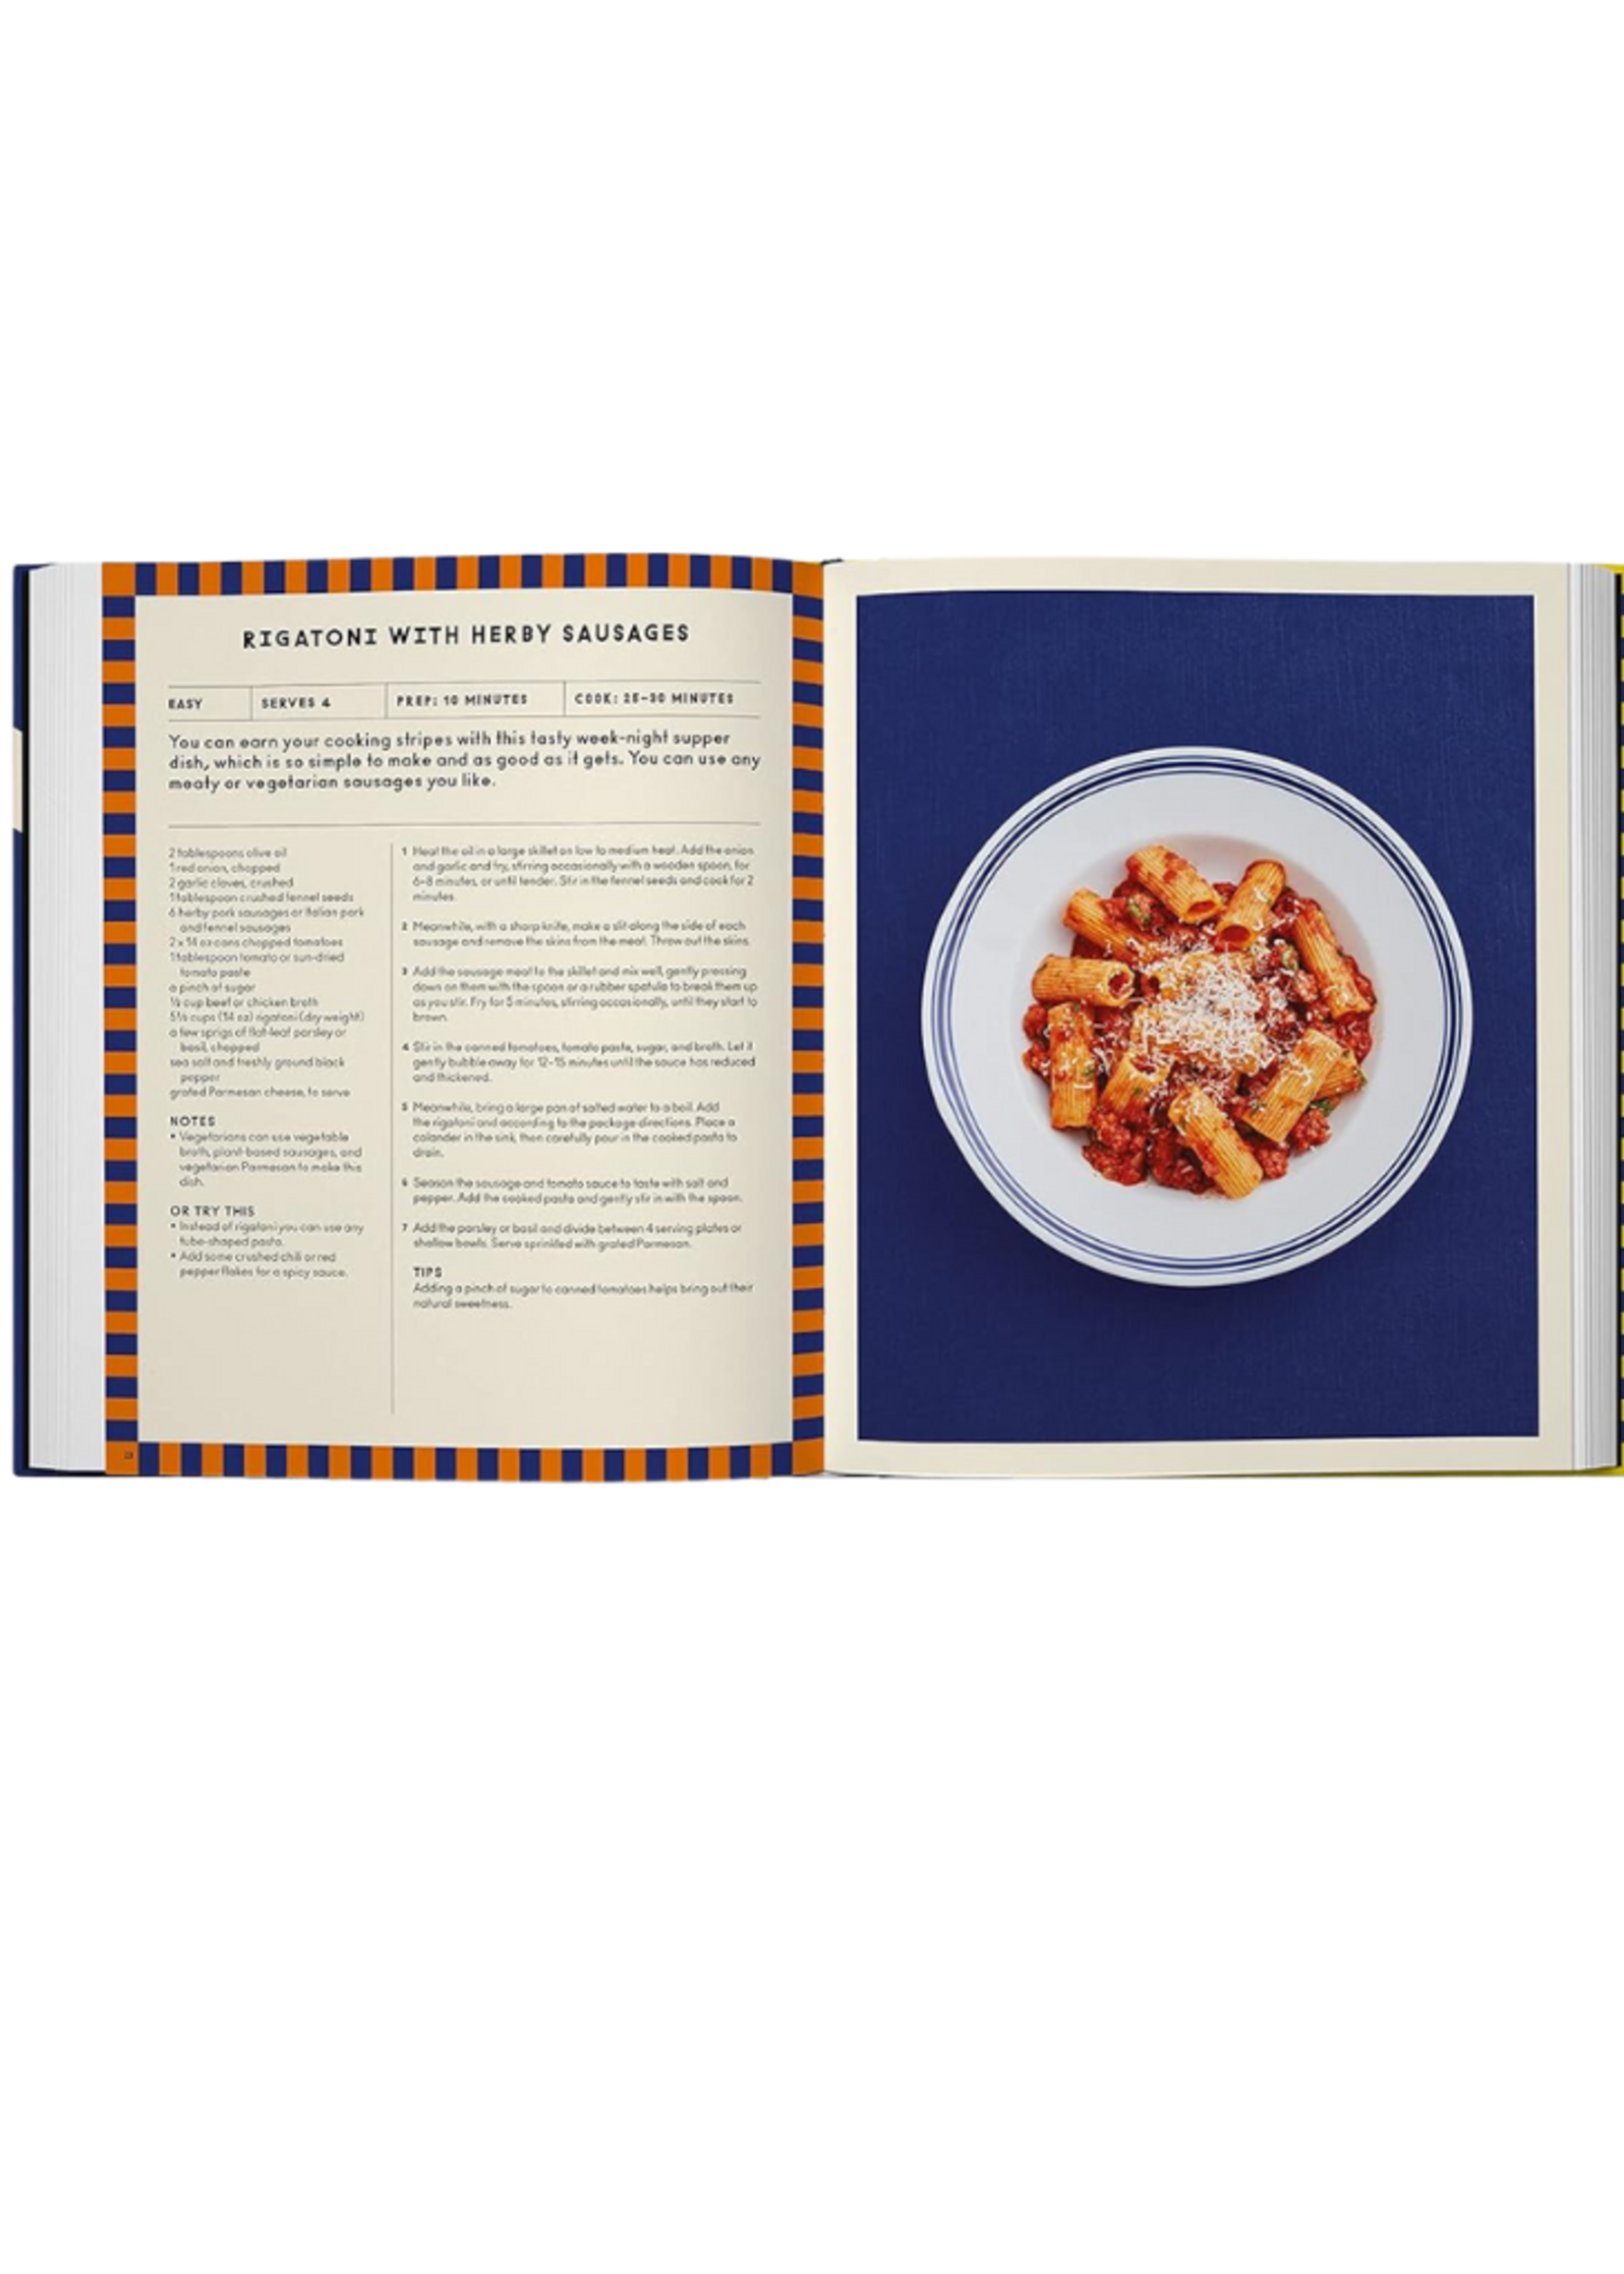 Phaidon Press The Story of Pasta and How to Cook it by Steven Guarnaccia with Heather Thomas